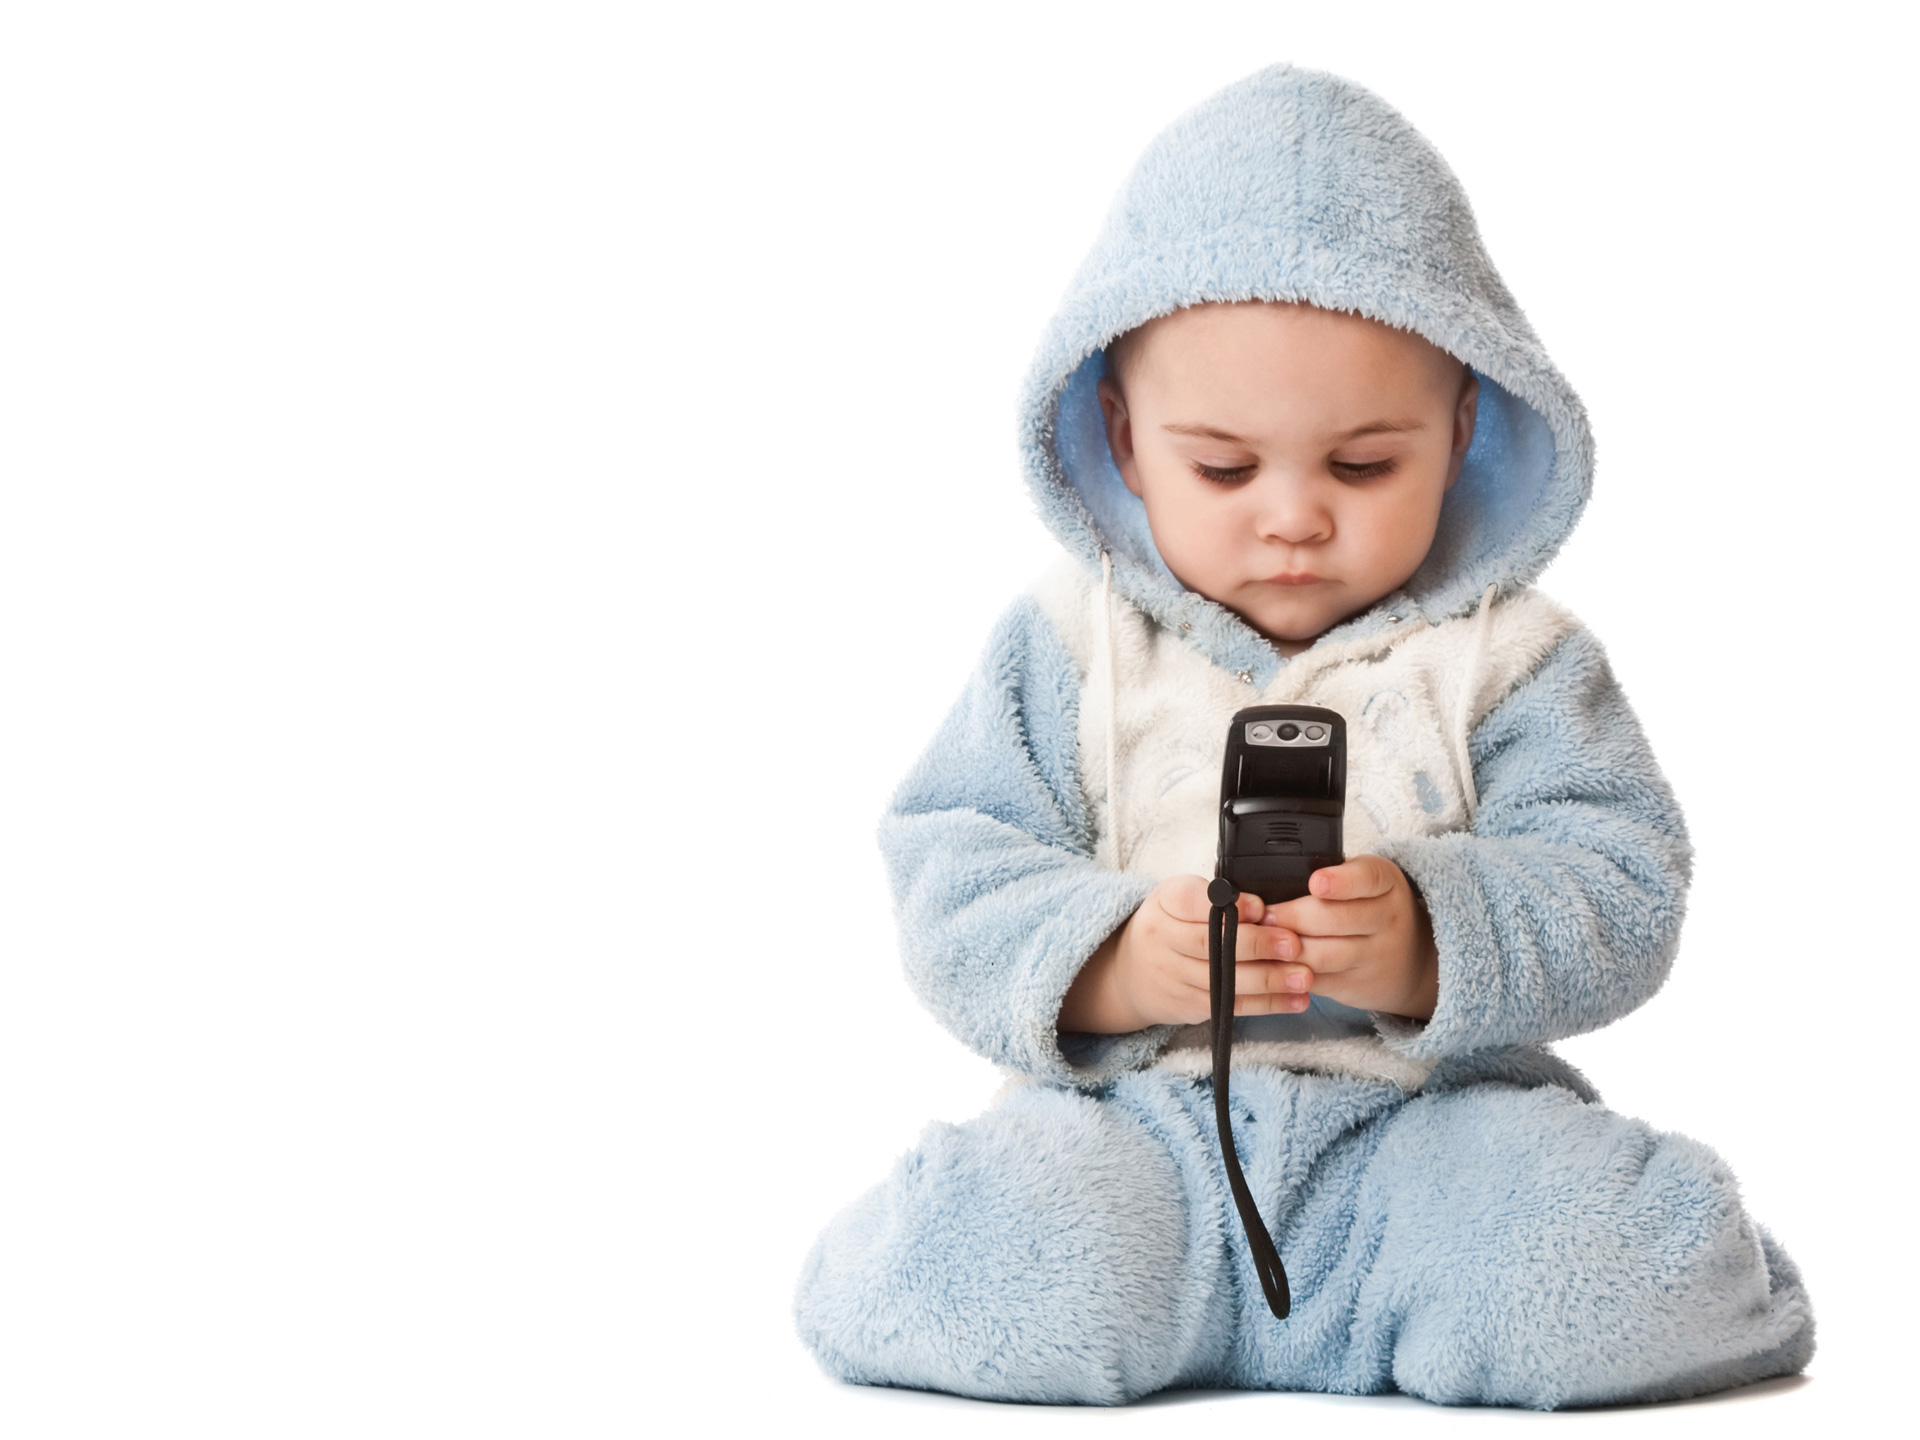 Cute Baby Boy Mobile Wallpaper - Baby Playing With A Phone - HD Wallpaper 